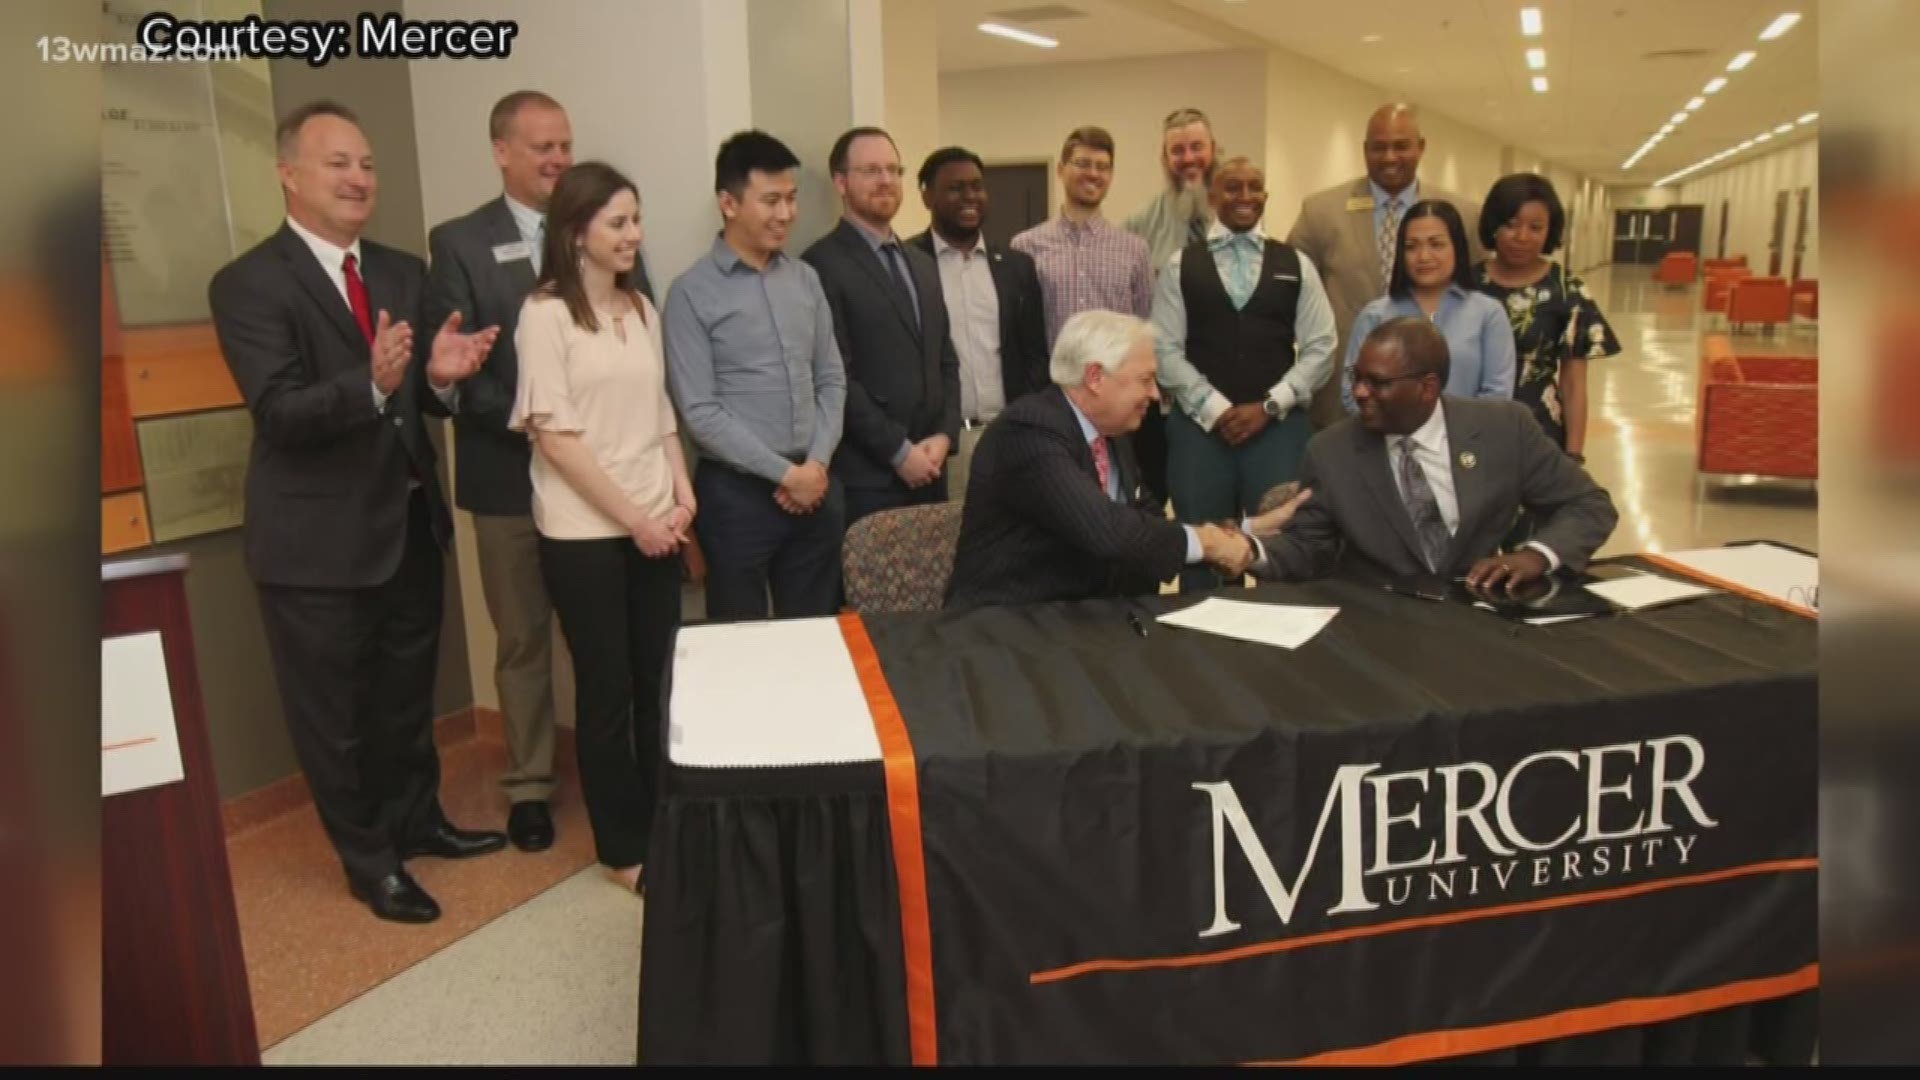 Mercer University and Bibb County Schools say they're launching a partnership to get more qualified STEM teachers into local classrooms. Thursday, they announced their plan to recruit five candidates per year for their new STEM Master of Arts in Teaching program.